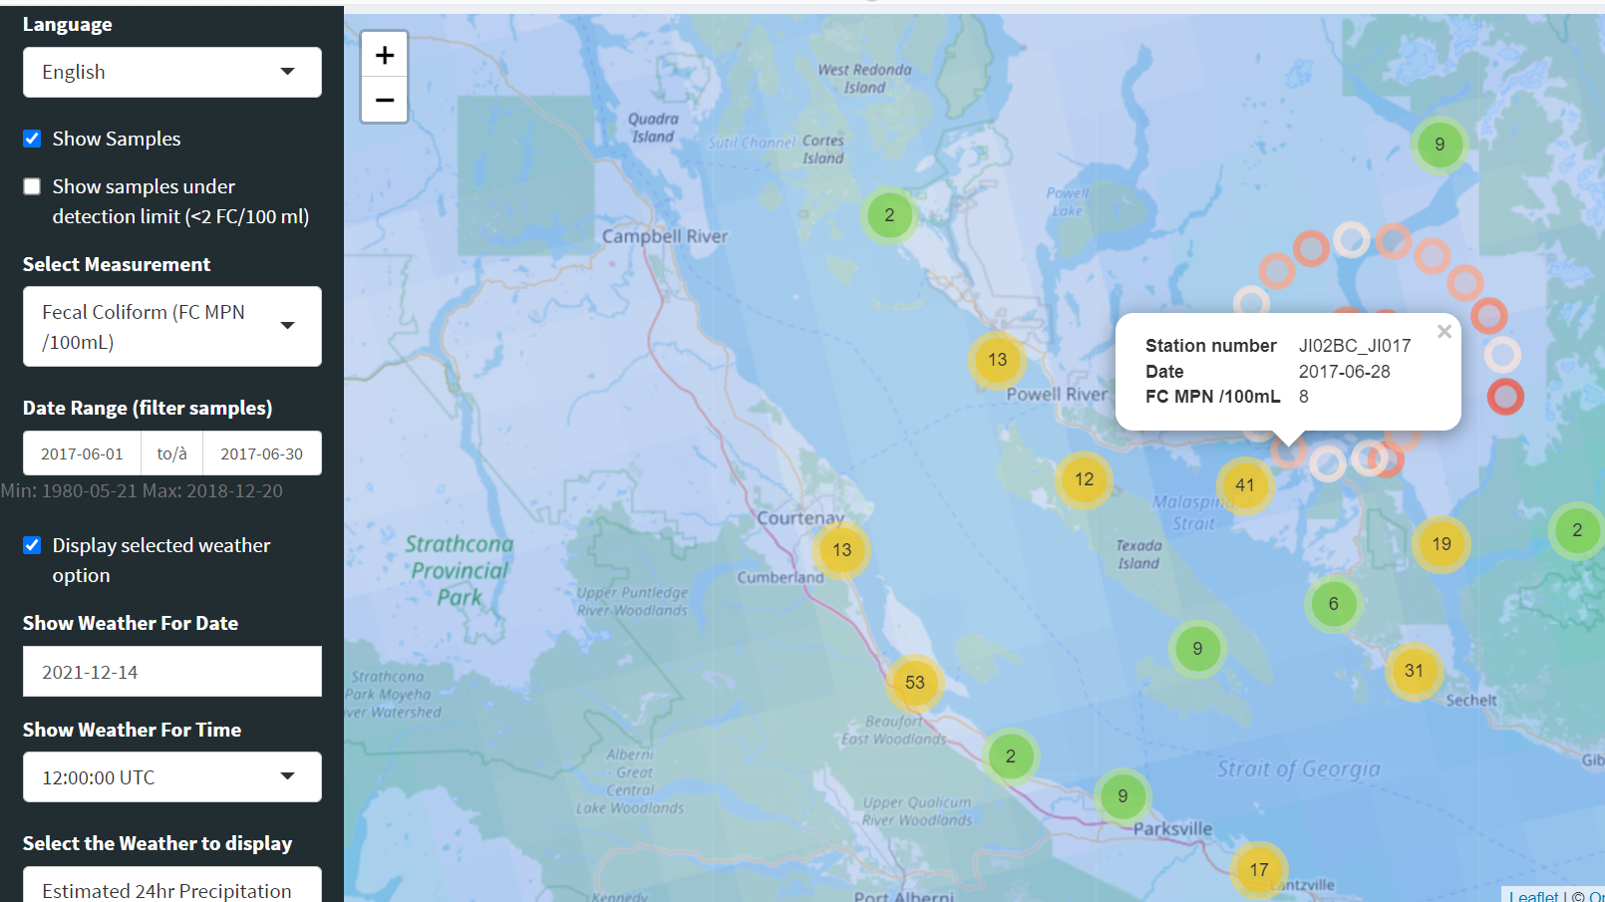 Demonstration of shellfish water classification interactive map tool.